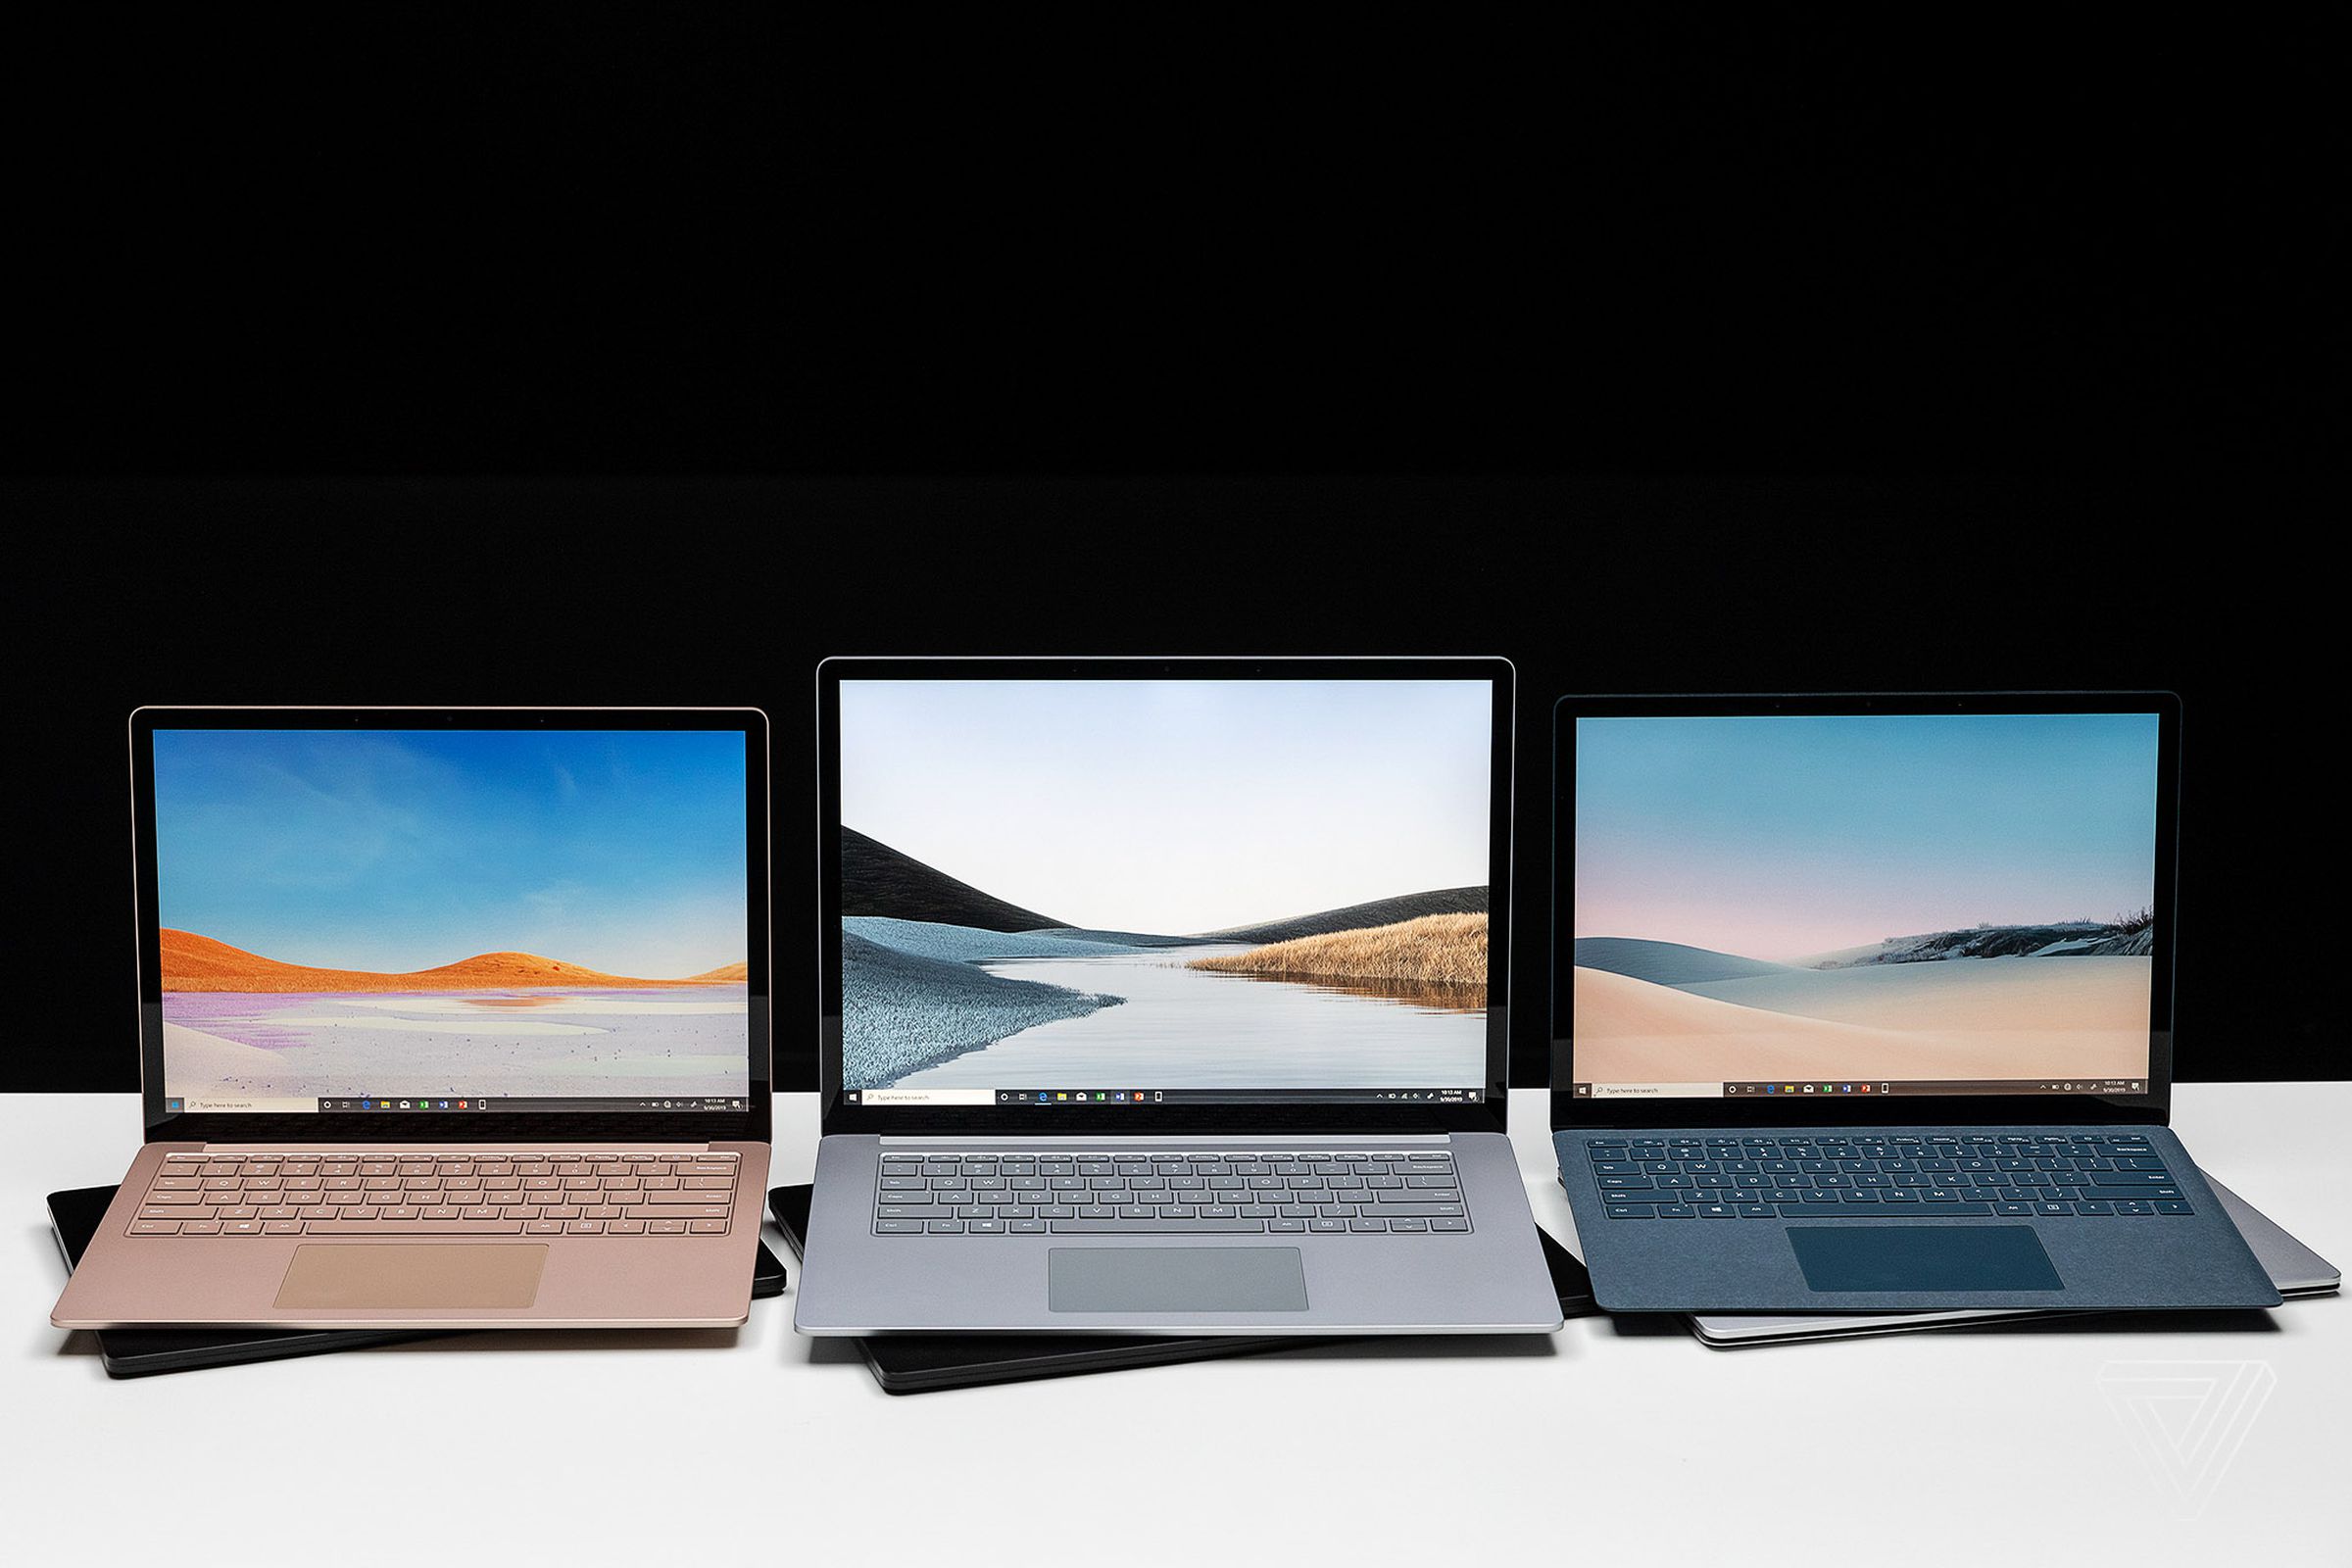 The Surface Laptop 3 comes in two different sizes: 13.5 and 15 inches